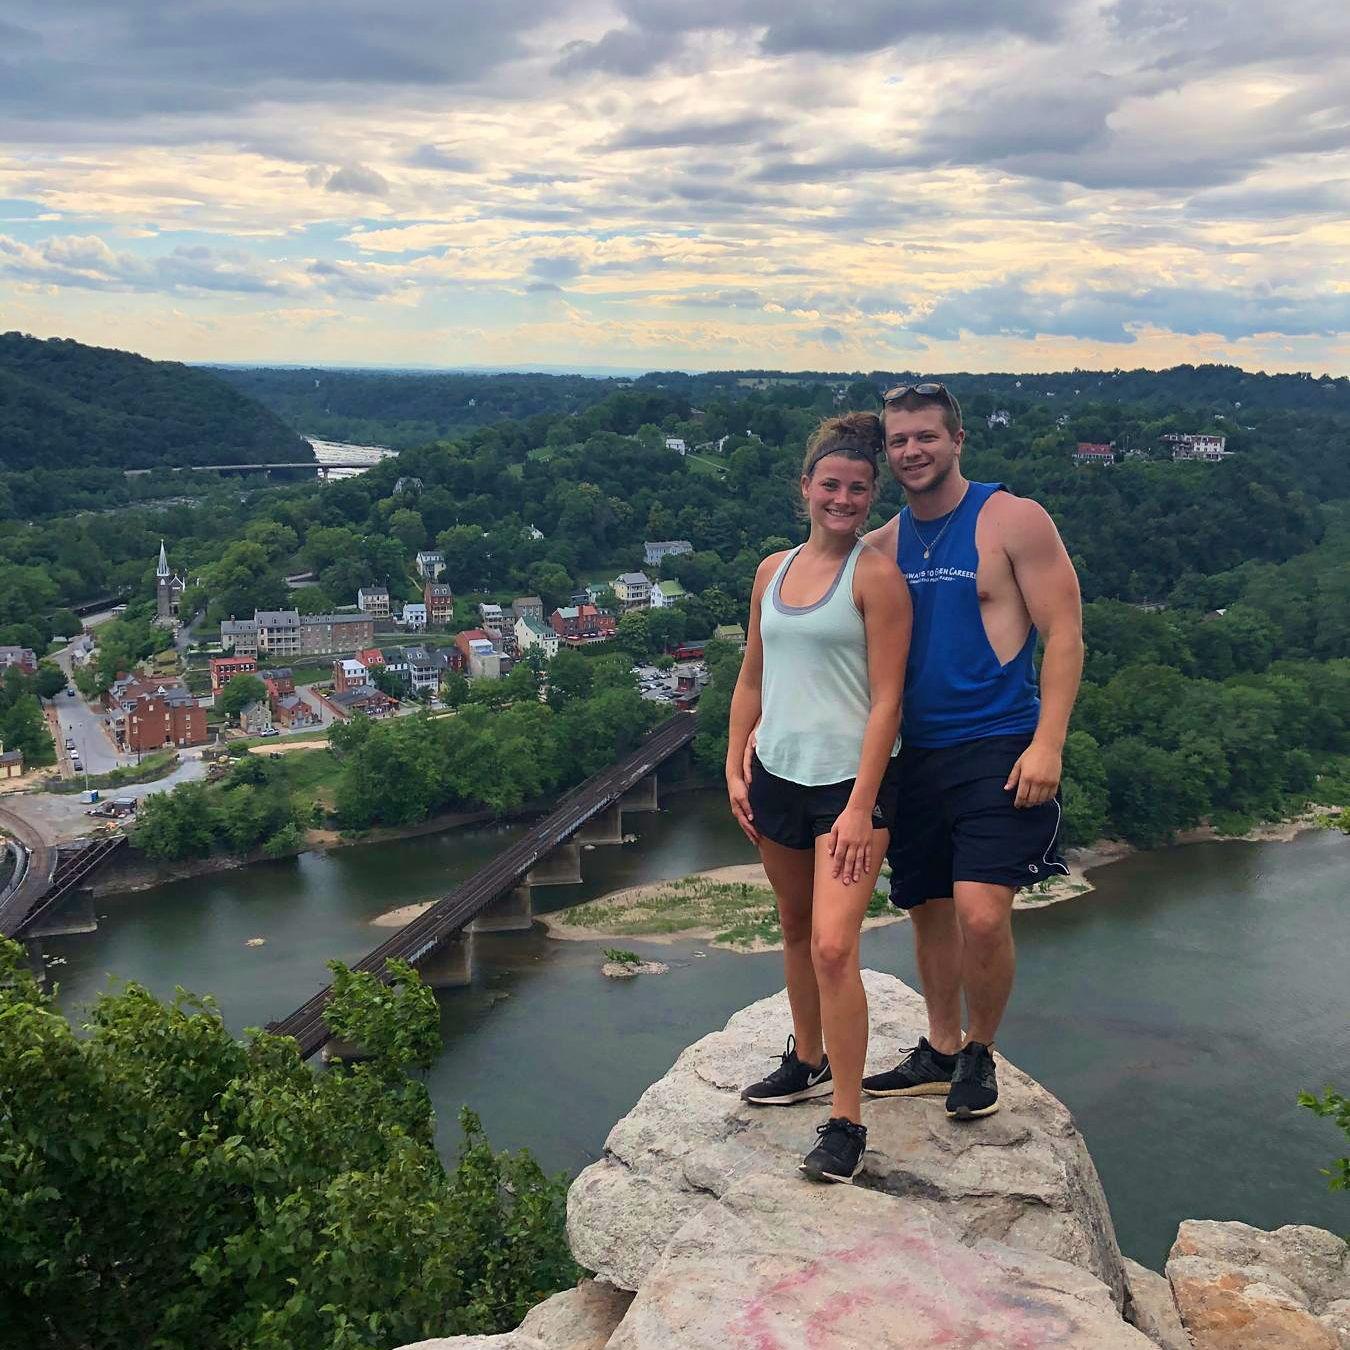 One of our favorite hobbies is hiking - this was one of our favorites! We spent this year hiking throughout West Virginia and Maryland